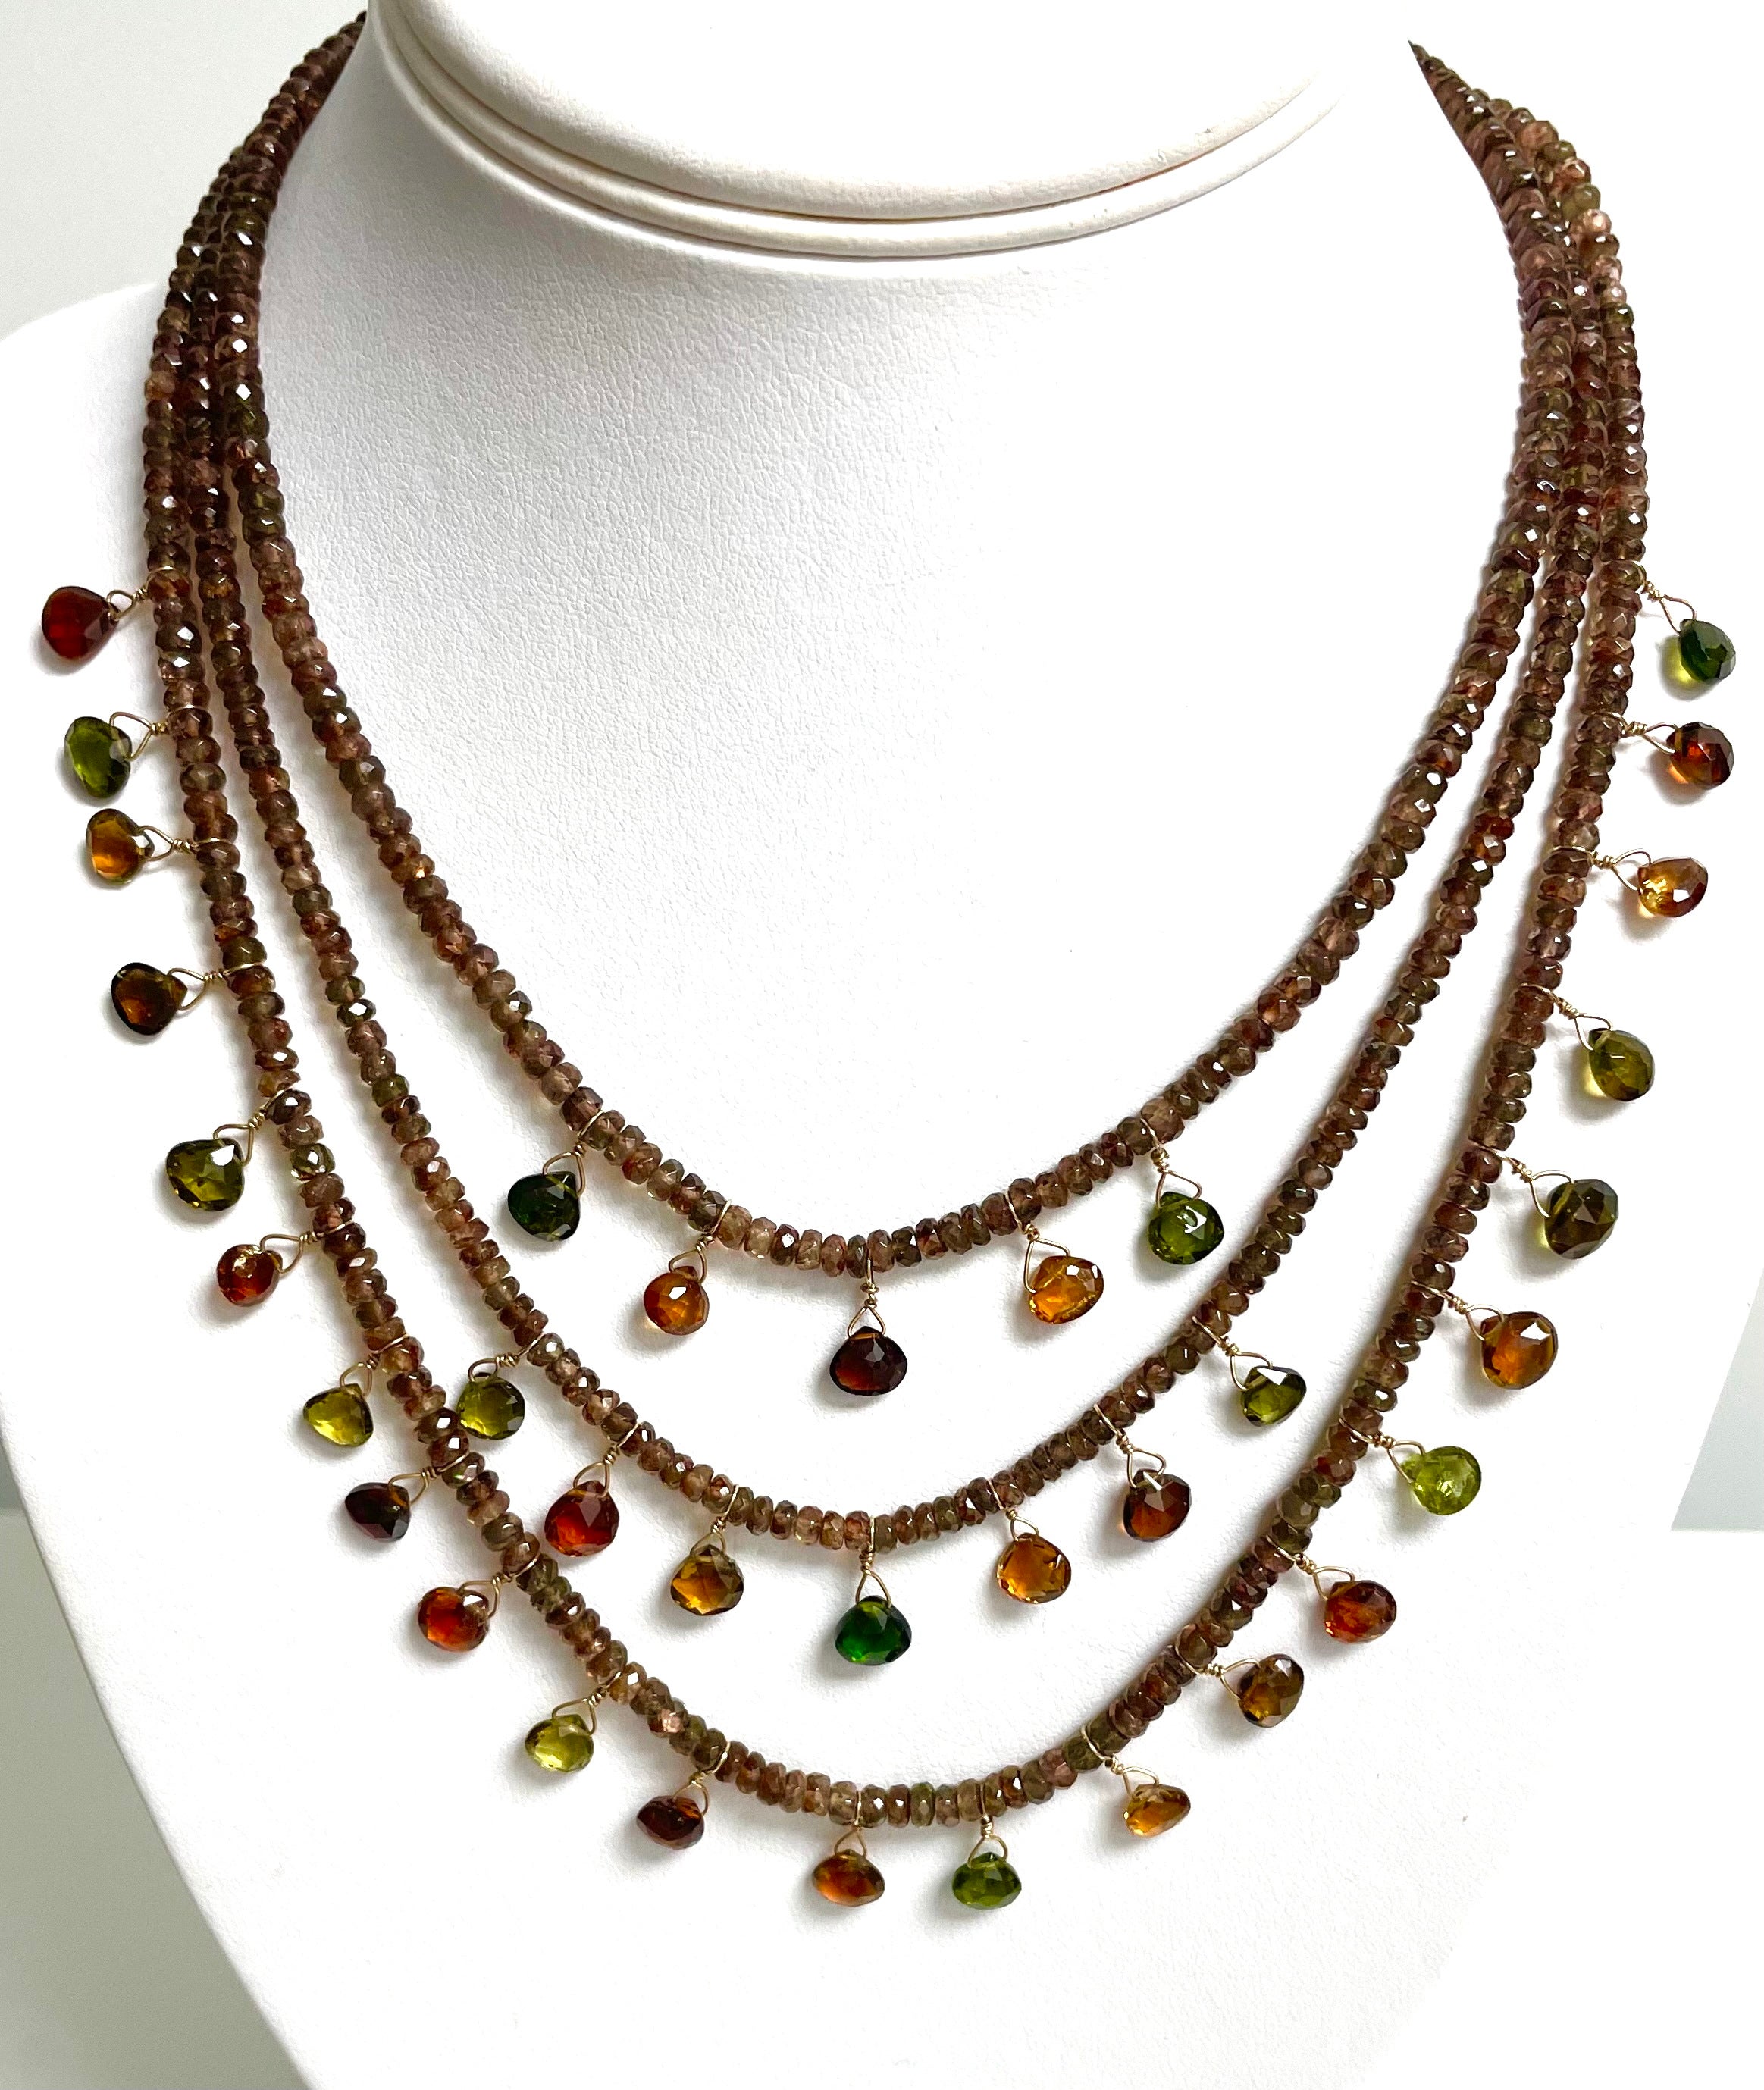 Description
Fall is calling you! These precious little multi-color Tourmaline whimsically dangle from warm, soft color Andalusite strands just like autumn leaves adorn a tree. Ready to rouse your senses for holiday festivities or simply adorn your